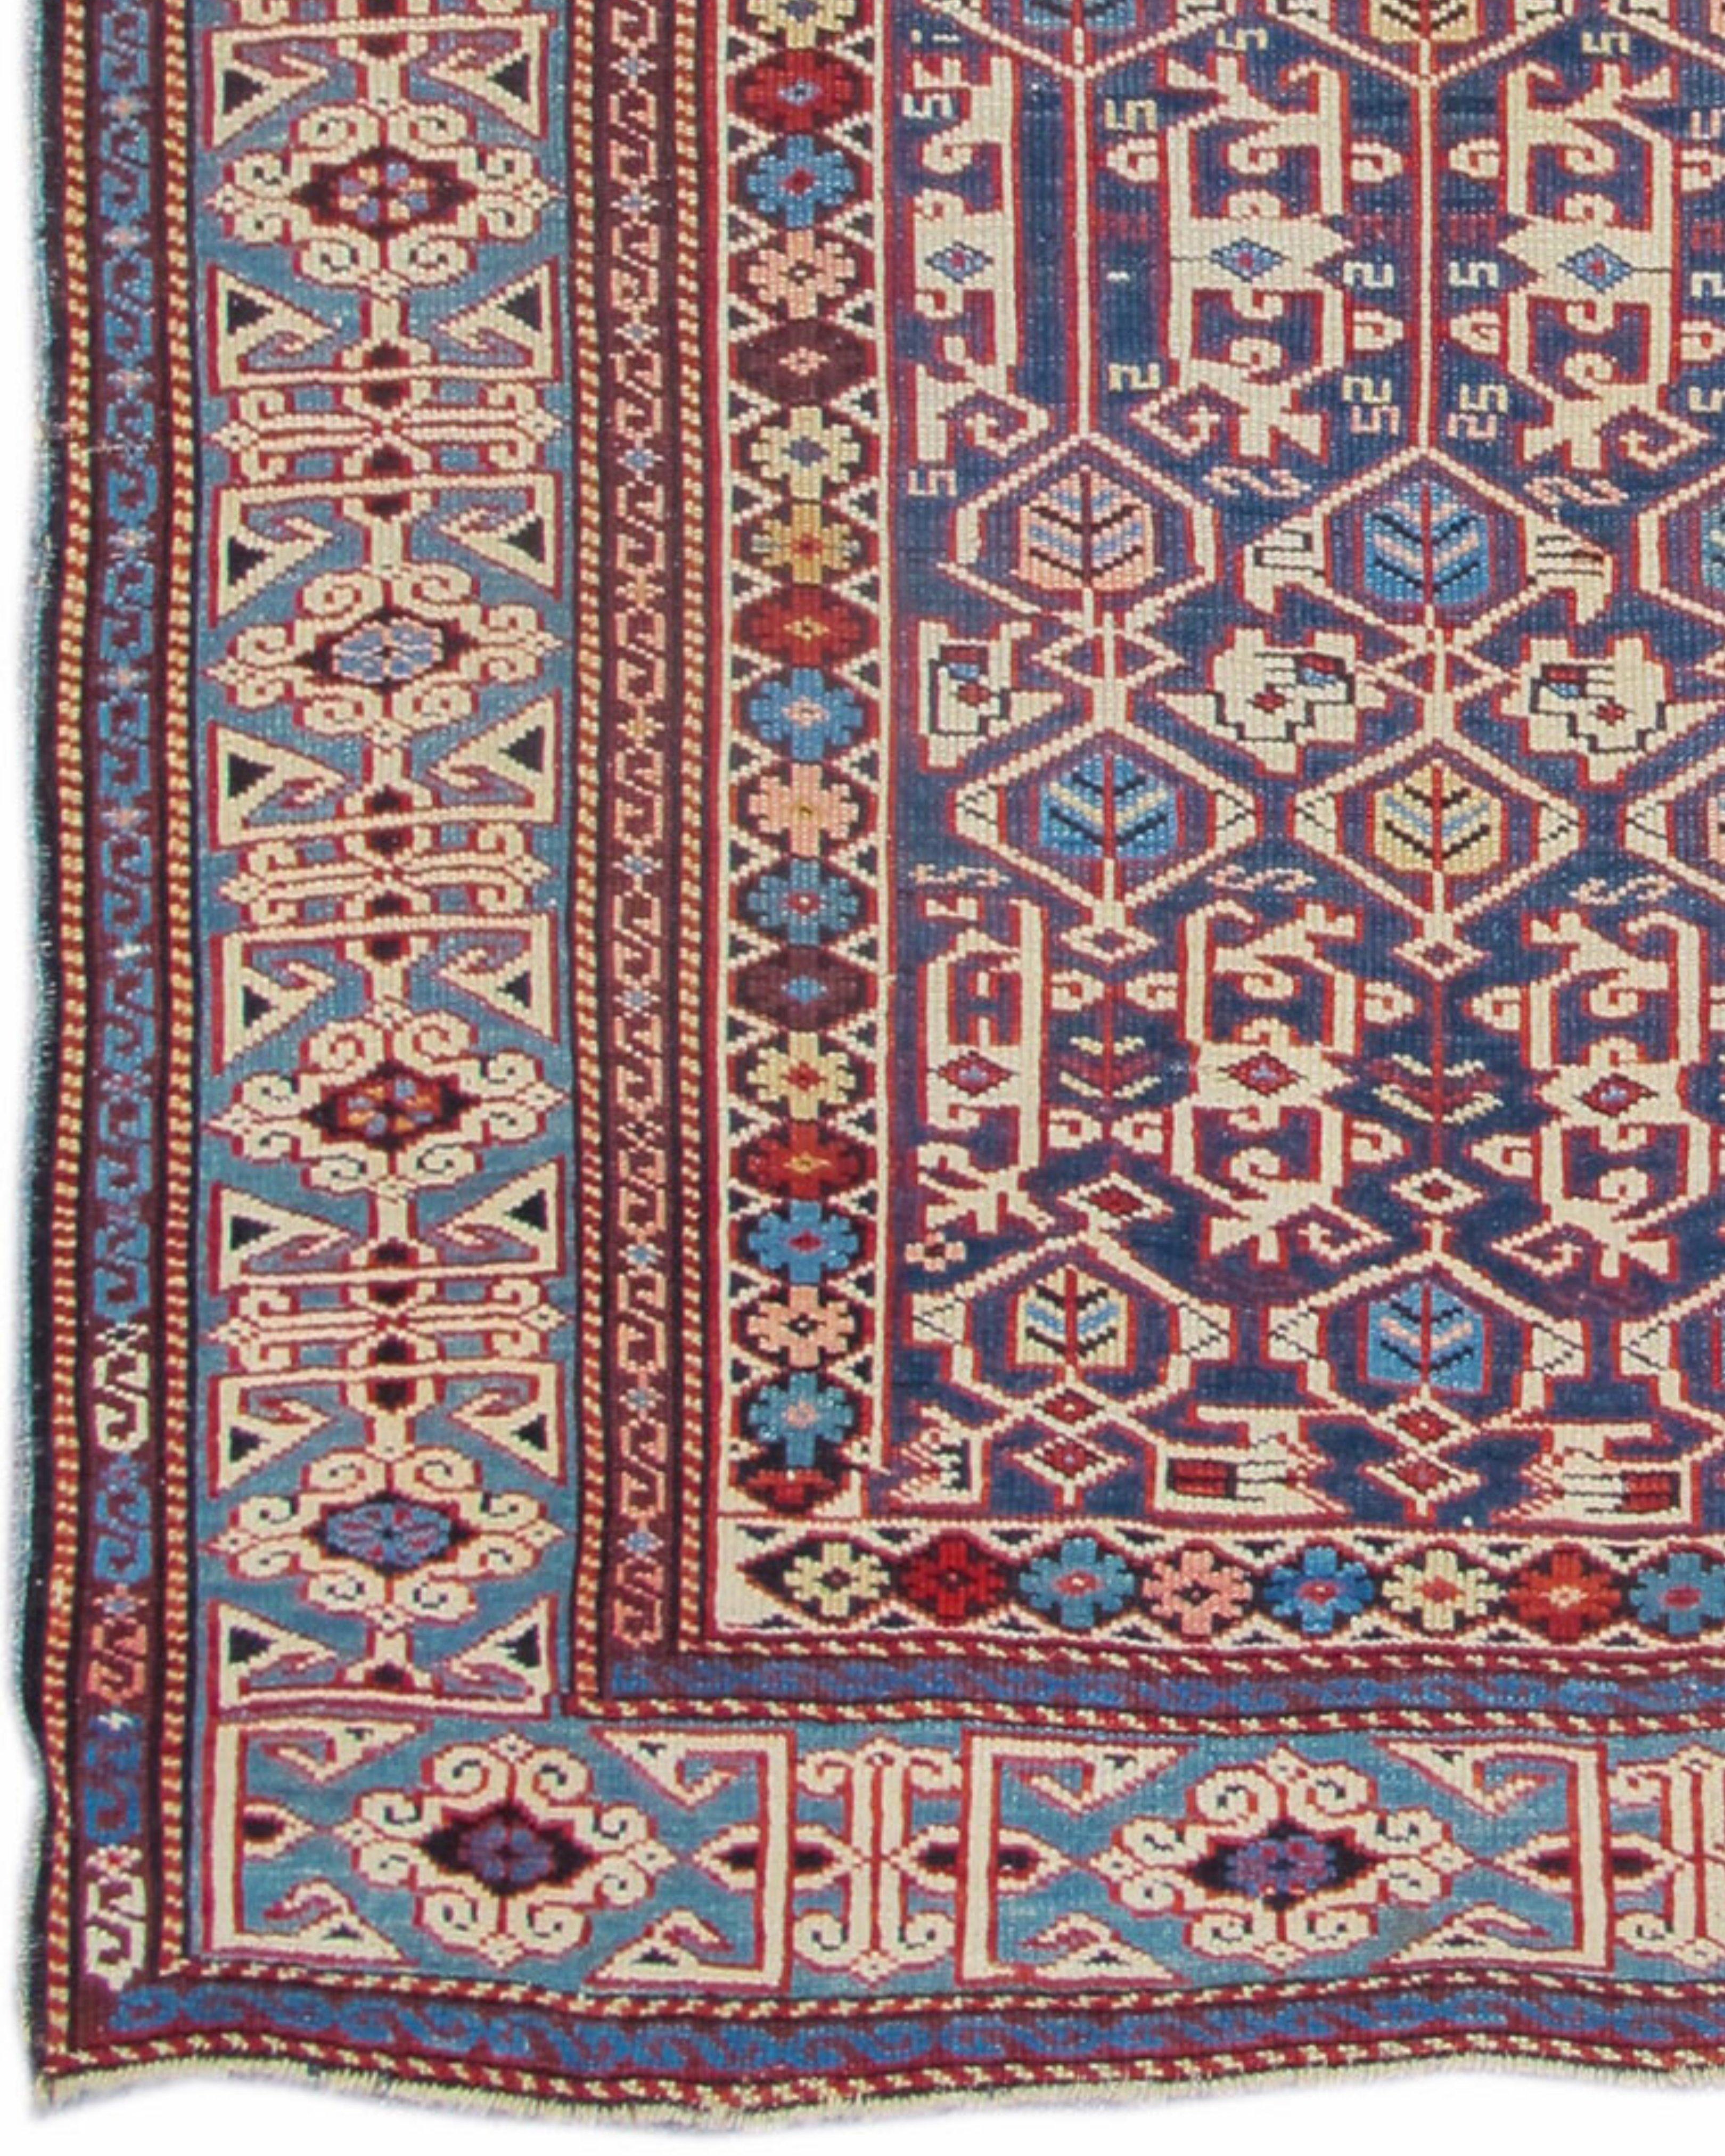 Antique Caucasian Kuba Rug, 19th Century In Excellent Condition For Sale In San Francisco, CA